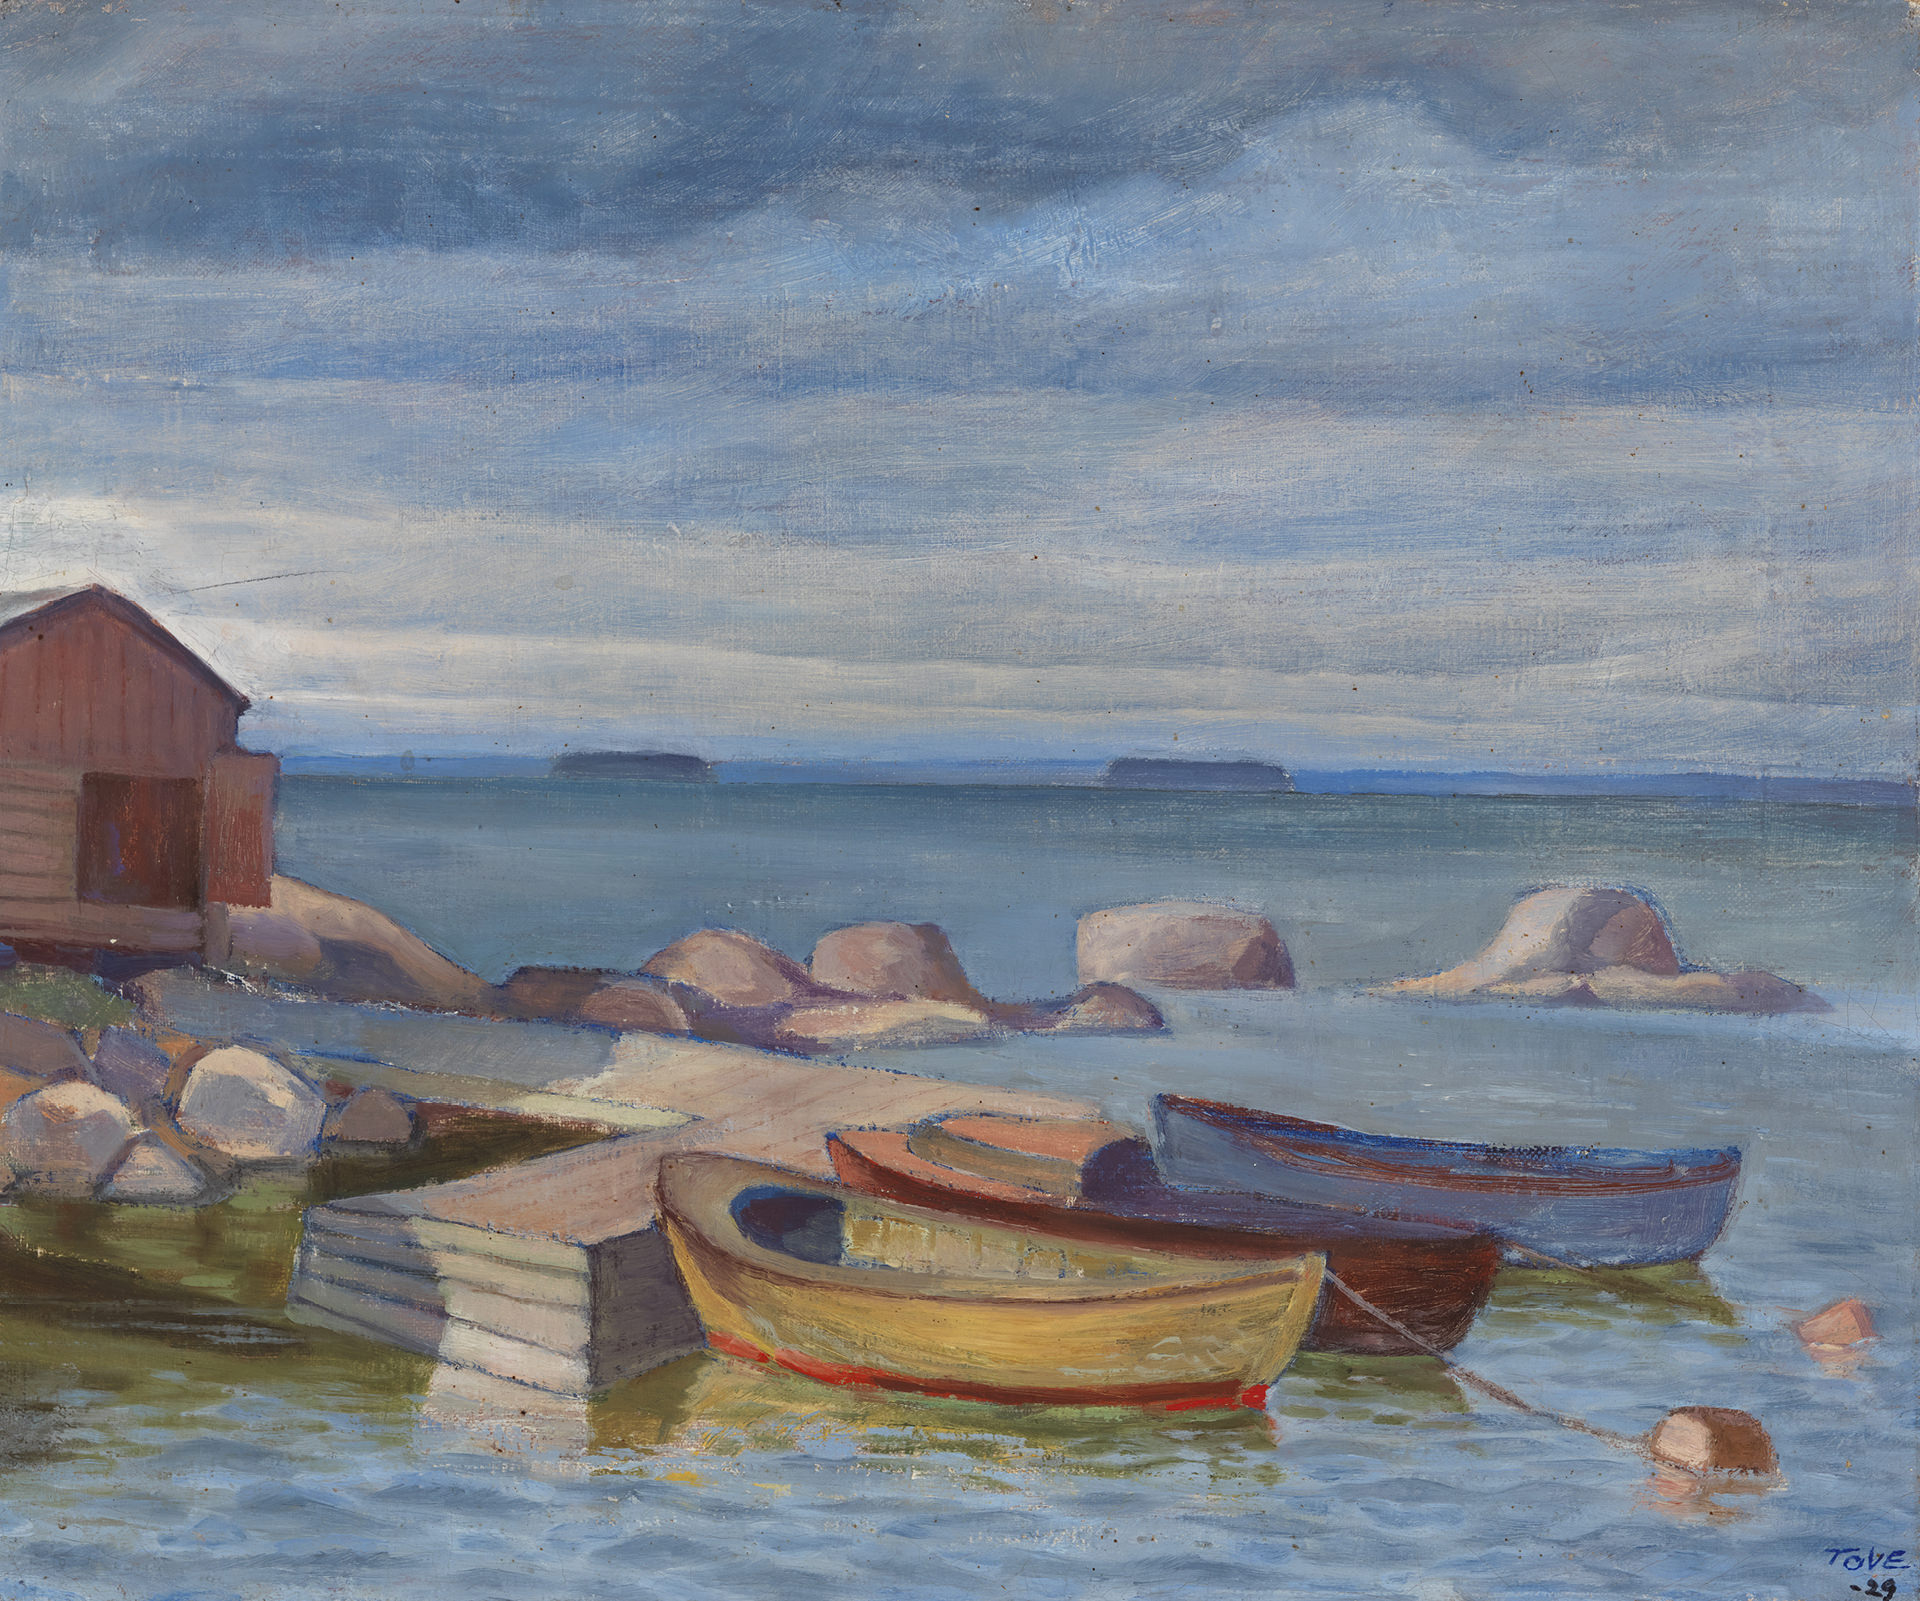 Tove Jansson painting boats